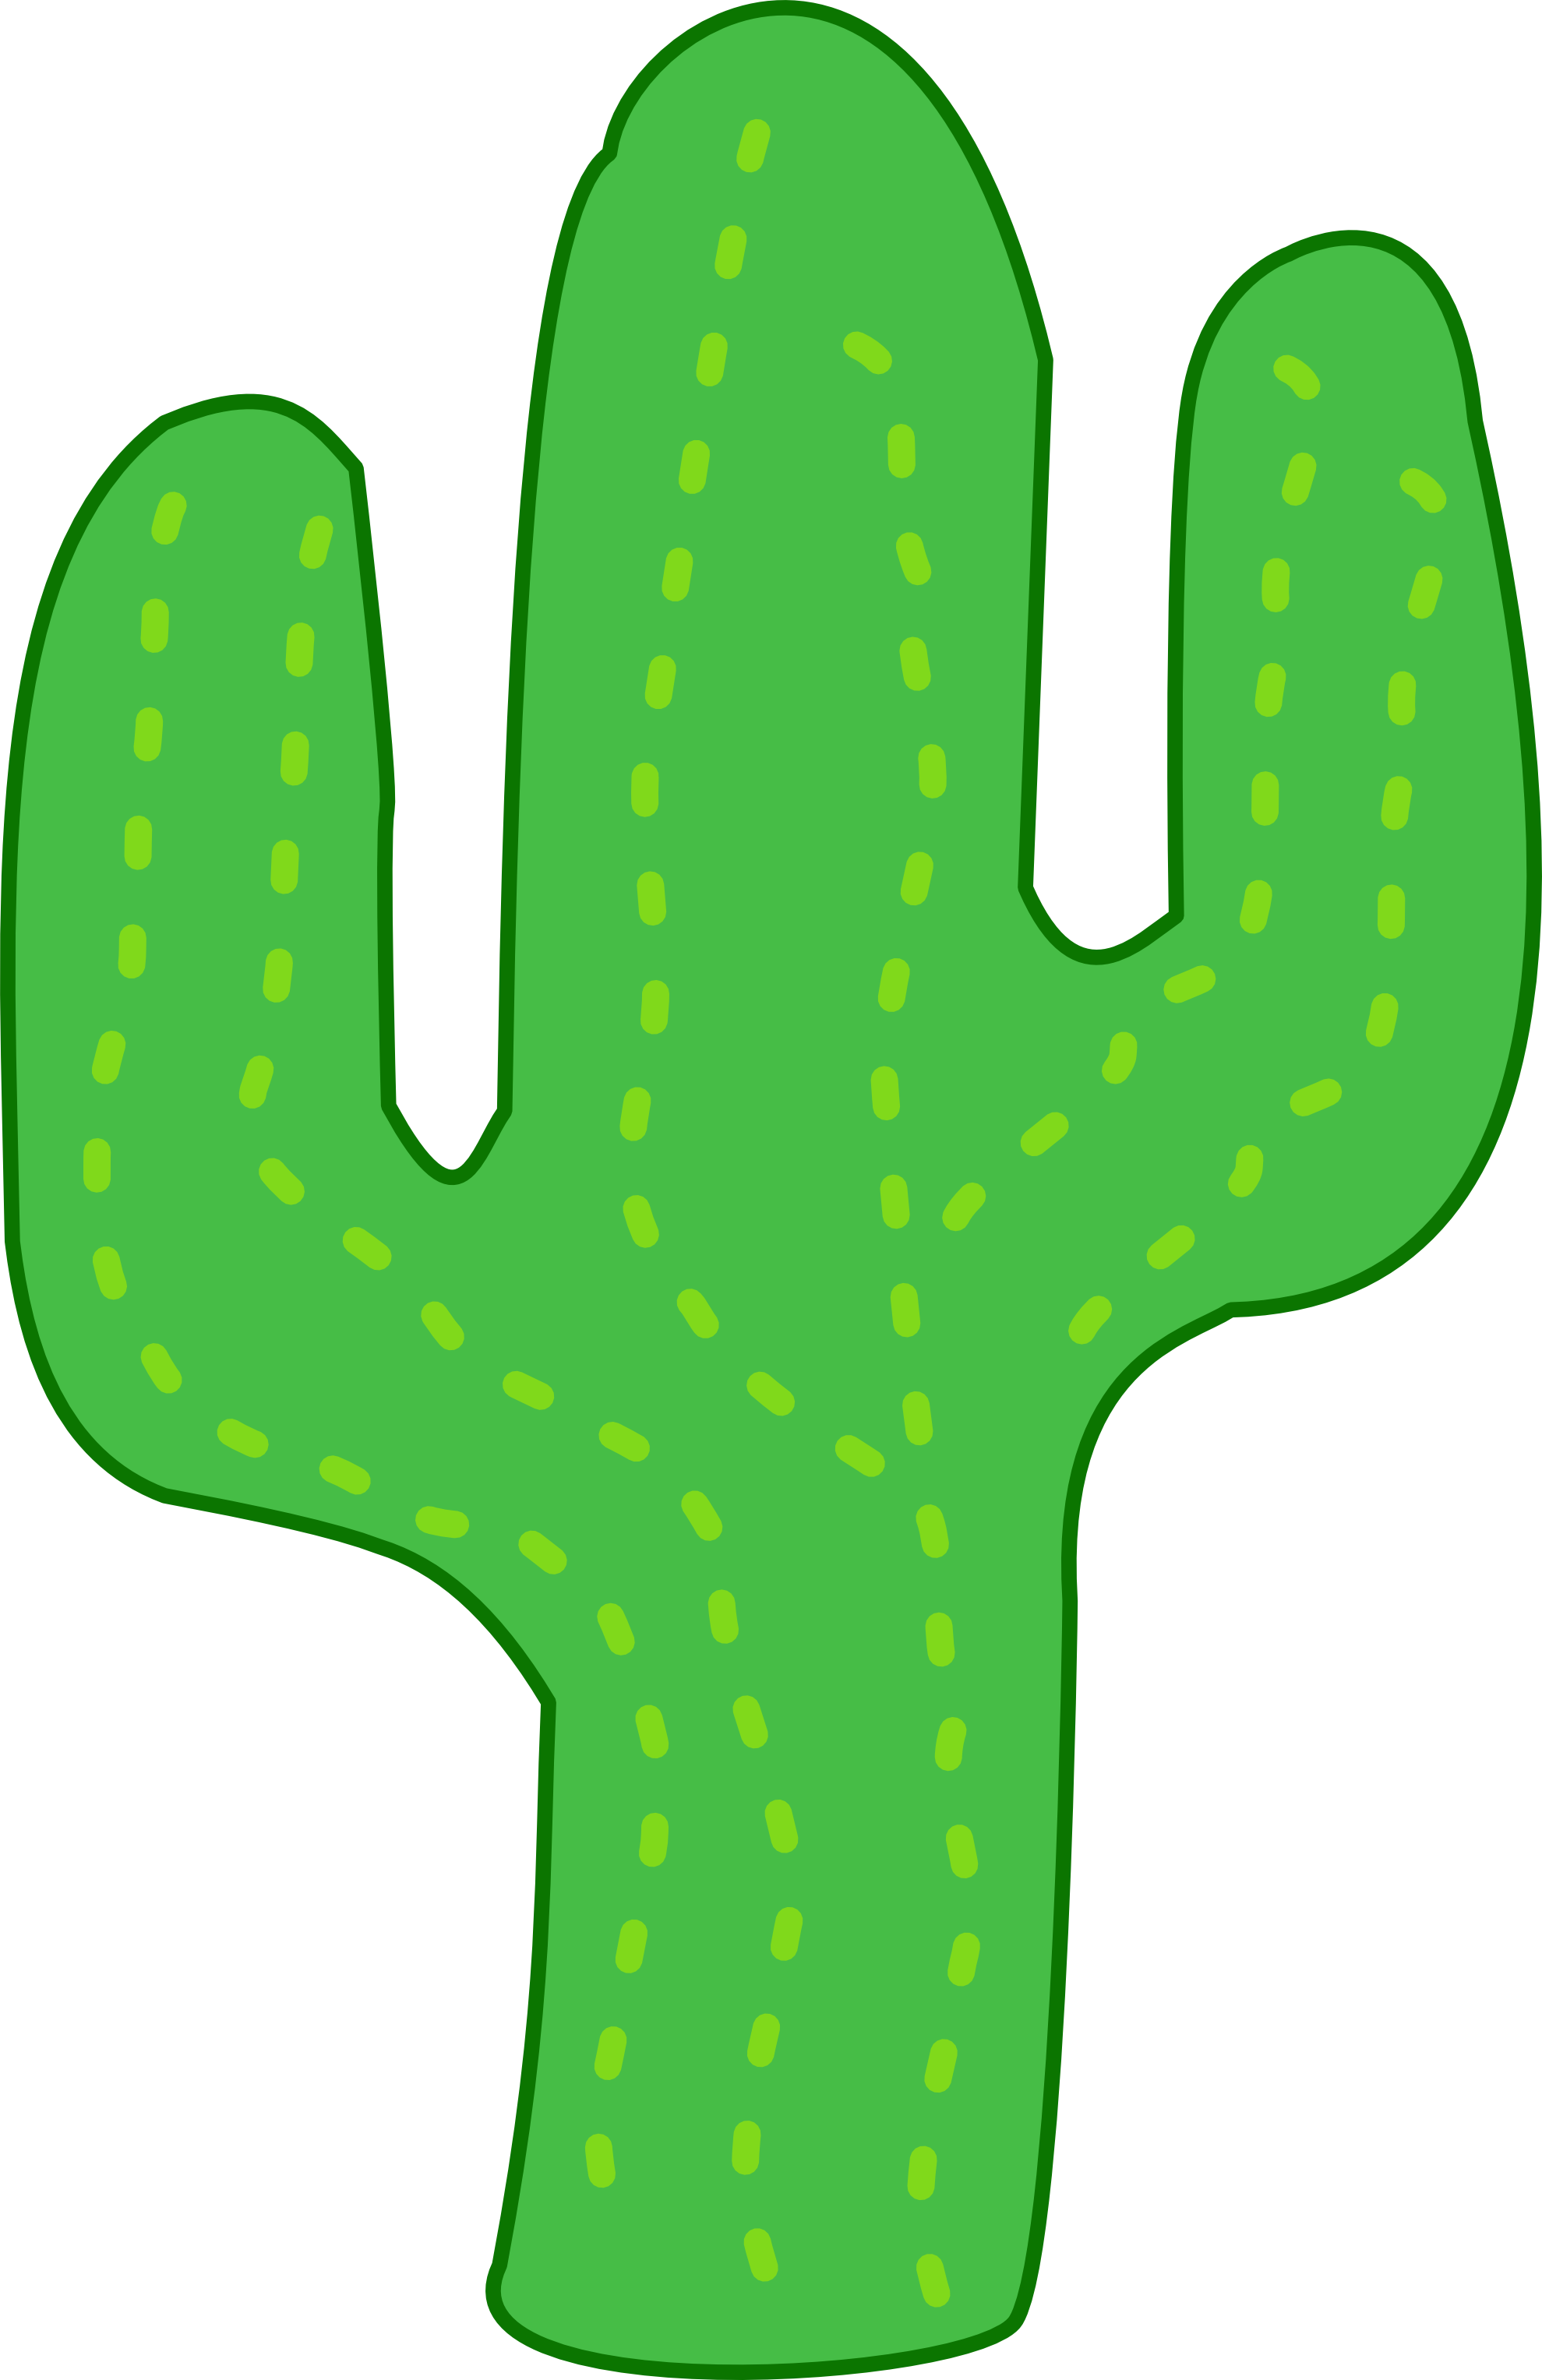 I need cactus clipart with a transparent background